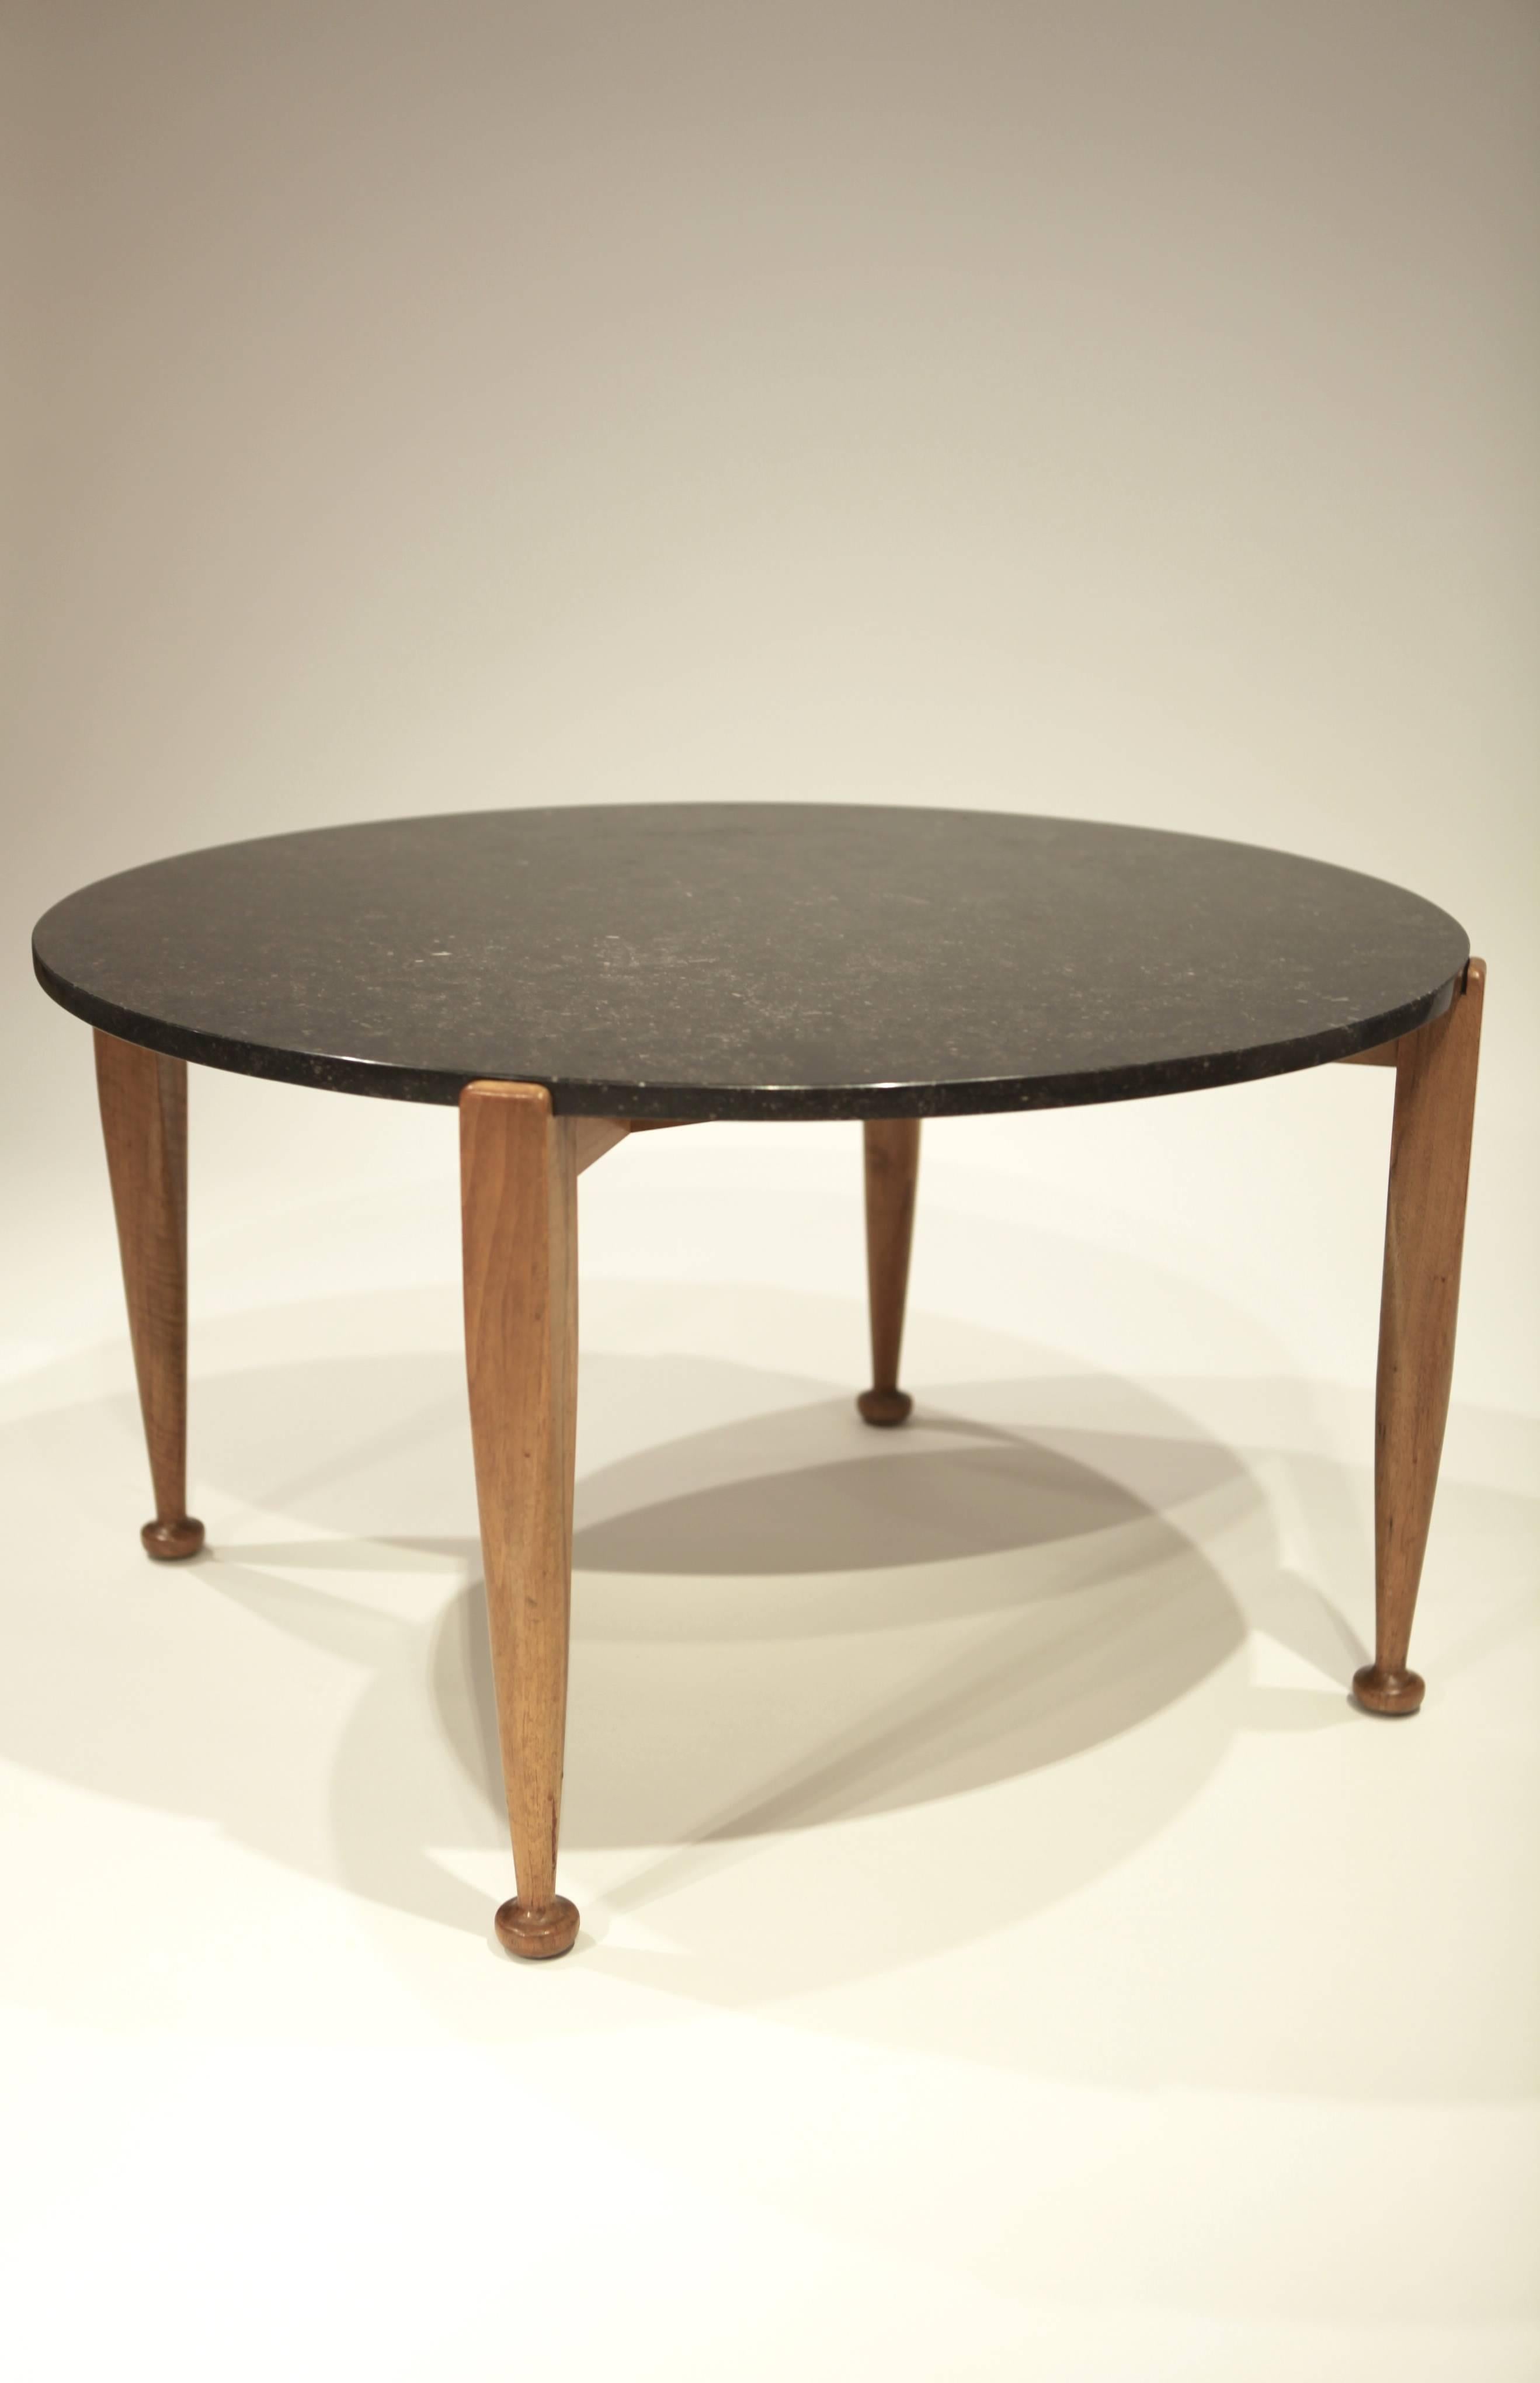 Josef Frank coffee table in walnut and black marble.
Manufactured by Svenskt Tenn in 1950, Sweden.